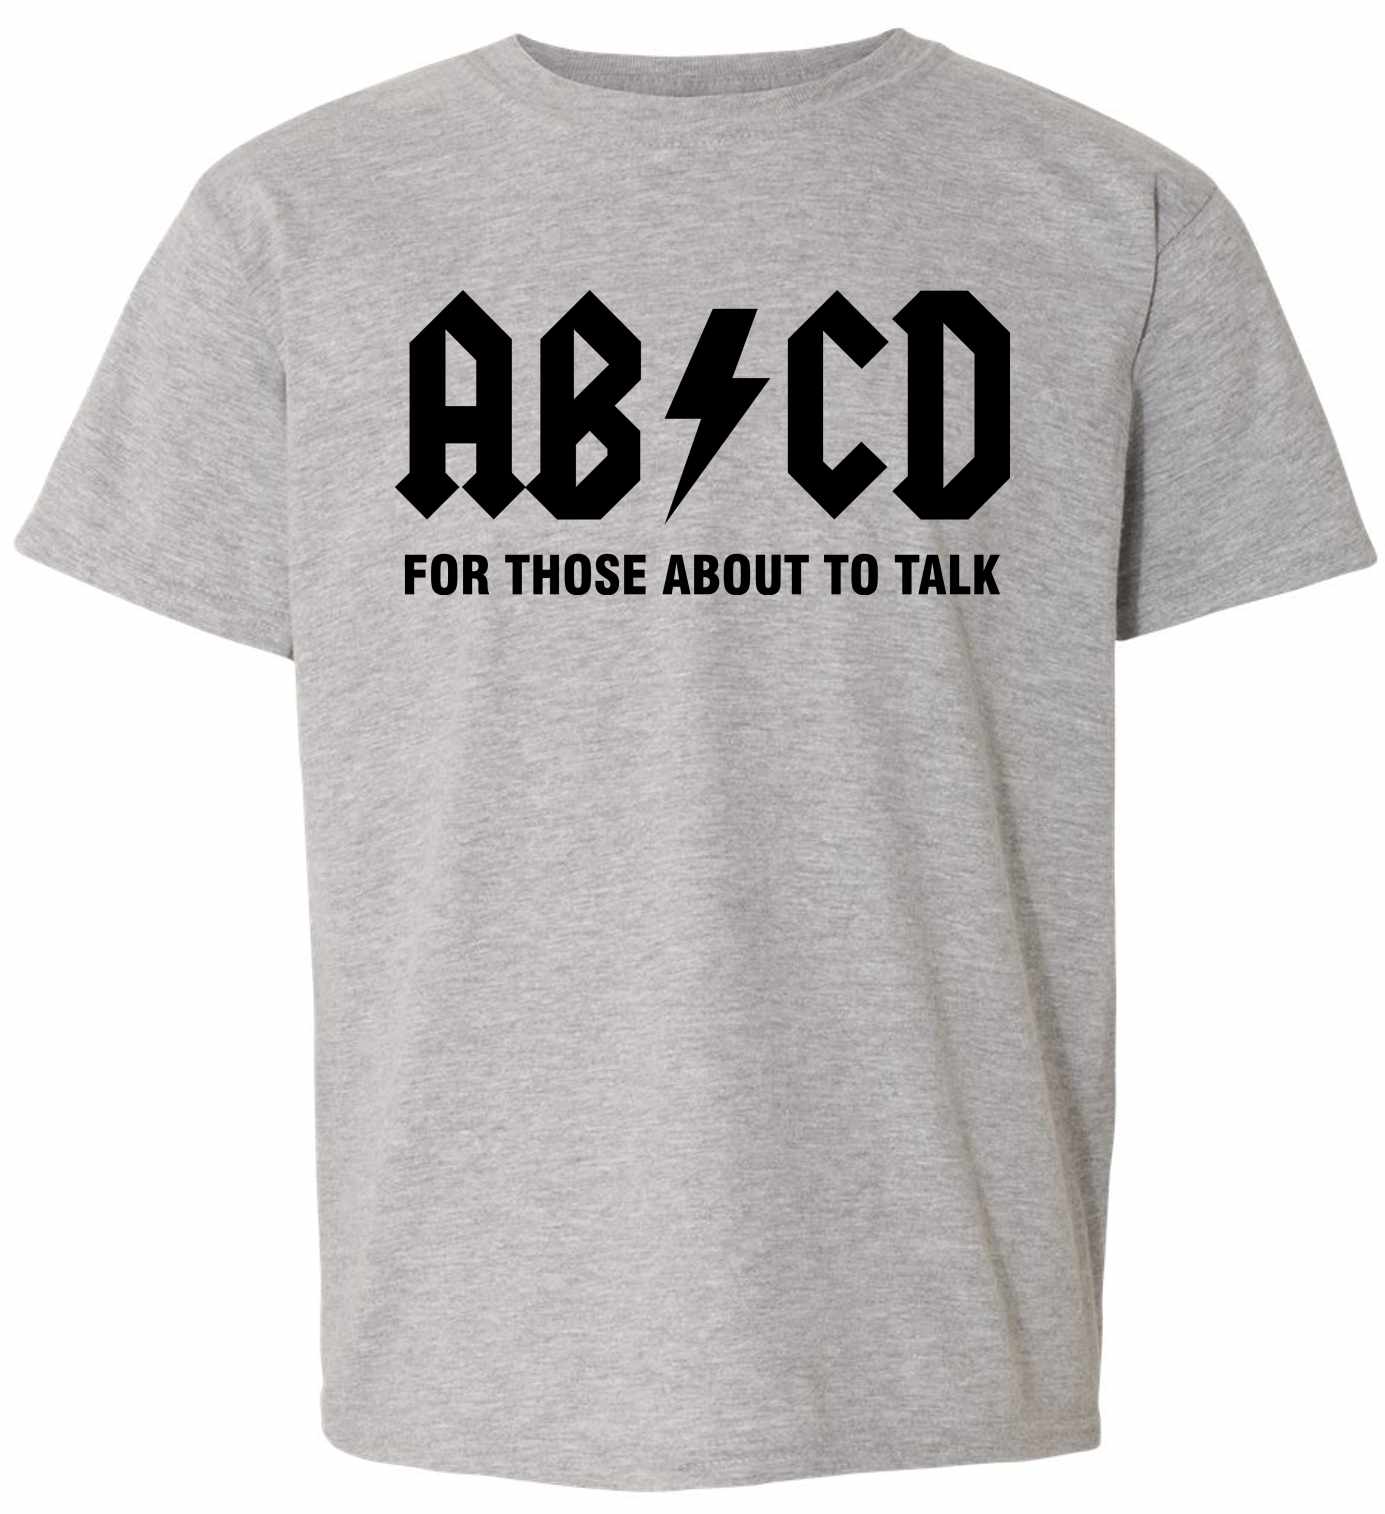 ABCD For Those About To Talk on Youth T-Shirt (#1084-201)